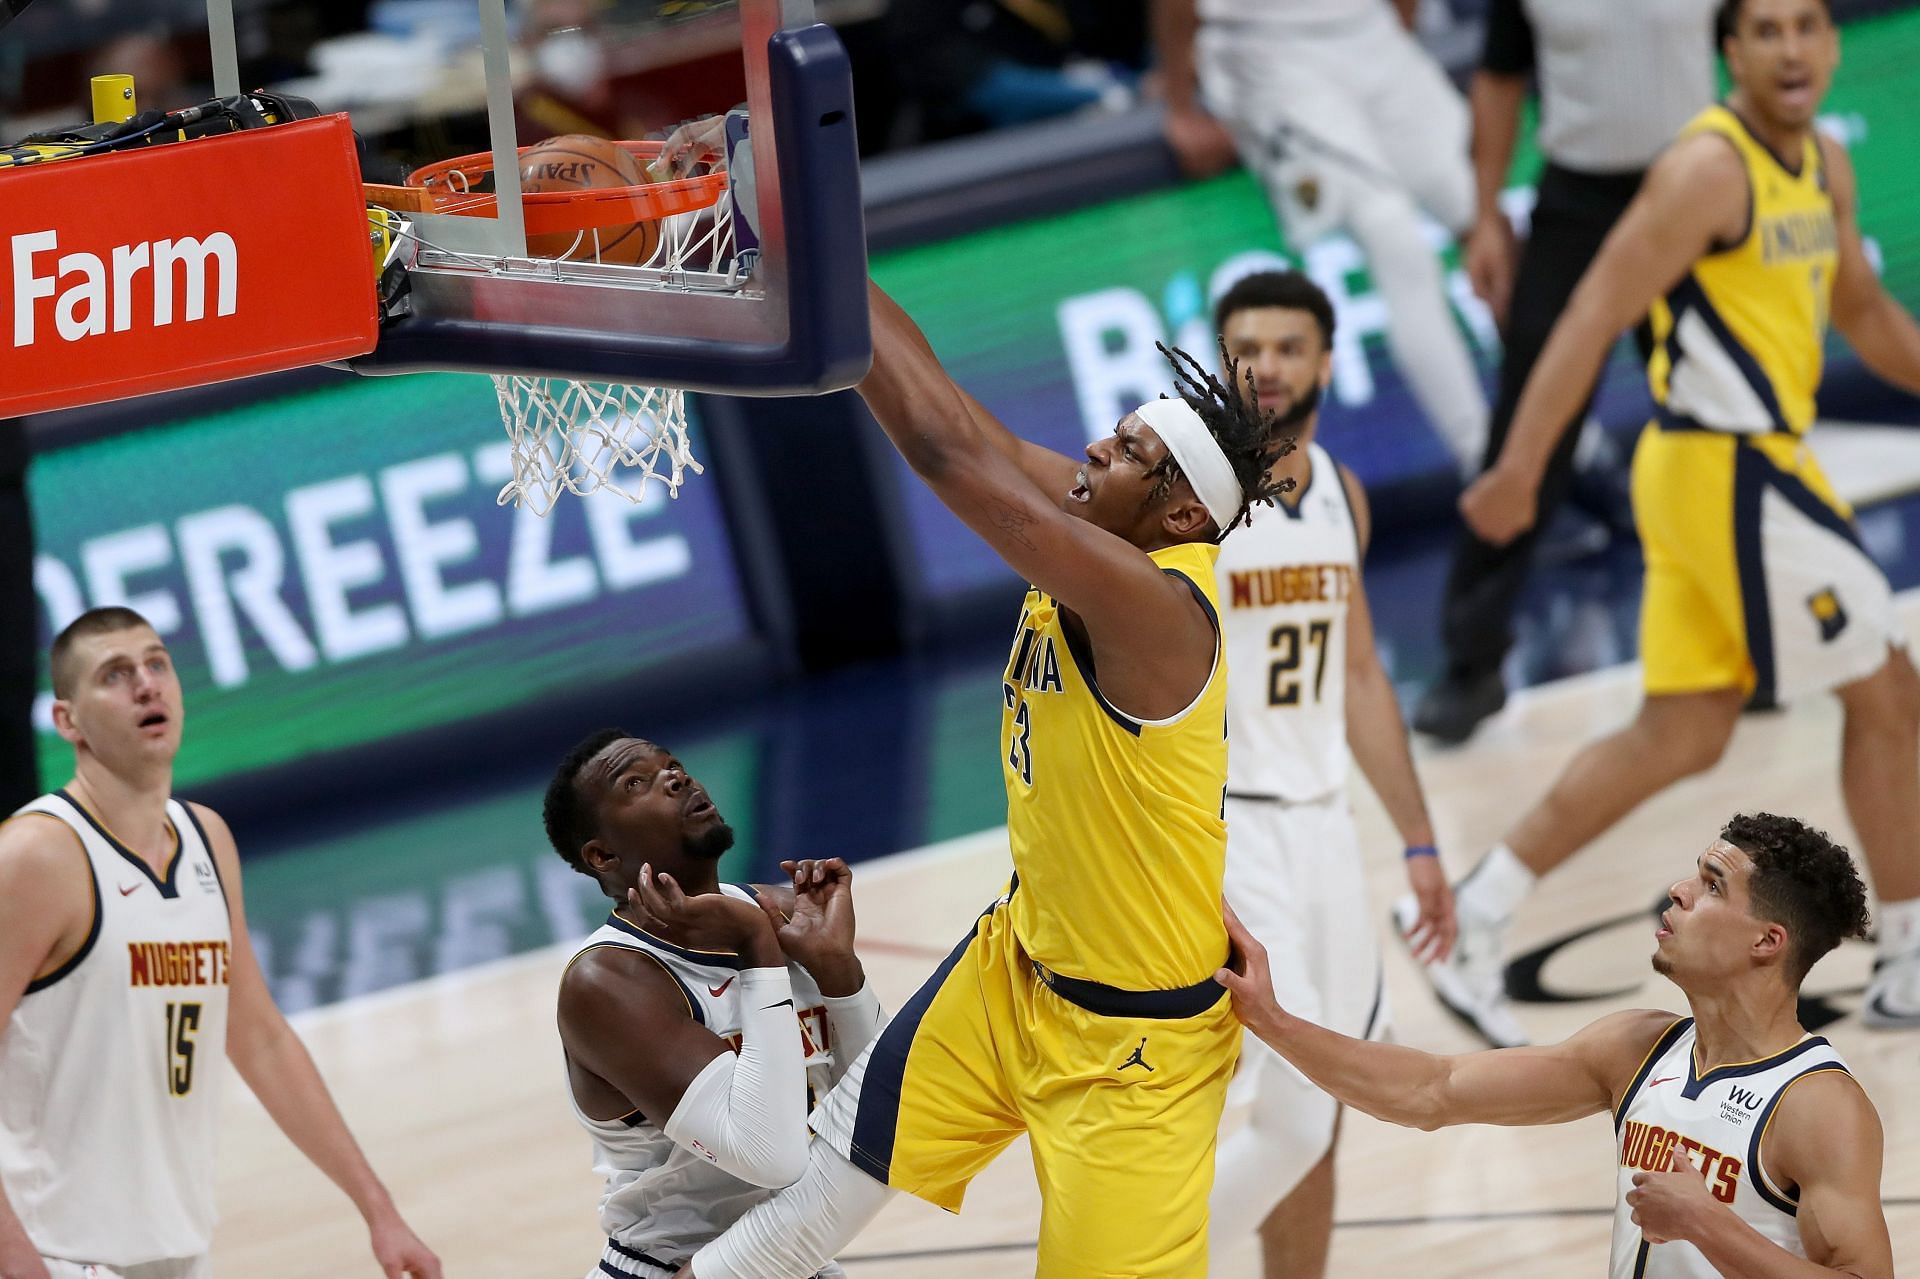 Indiana Pacers star Myles Turner with a thunderous dunk against the Denver Nuggets